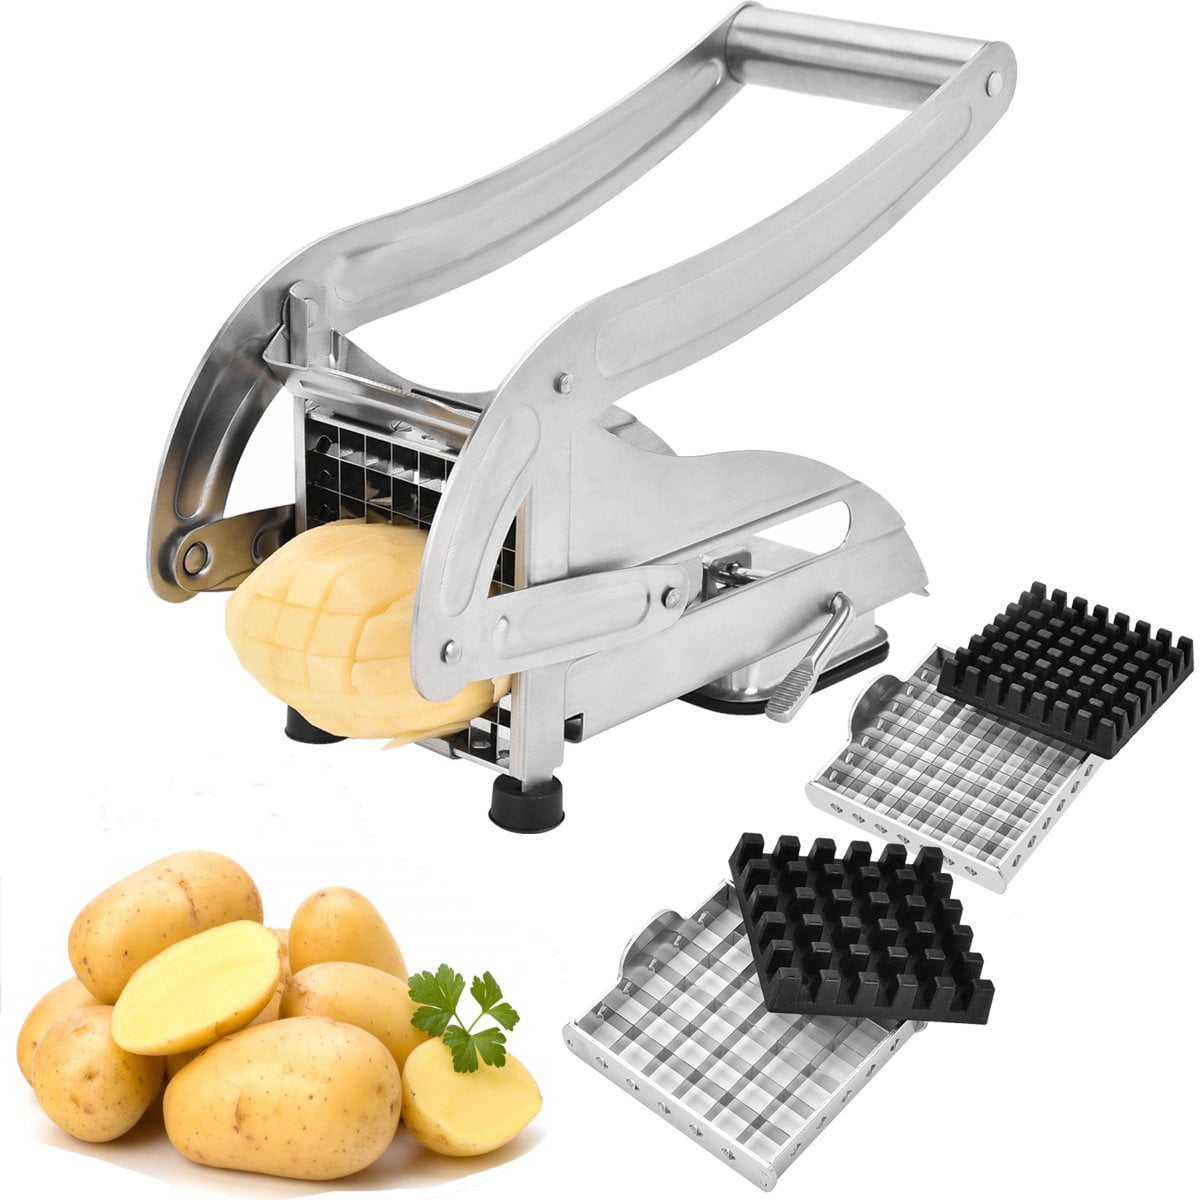 New Potato Chipper Stainless Steel Blades Chrome Potato French Fries Cutter 